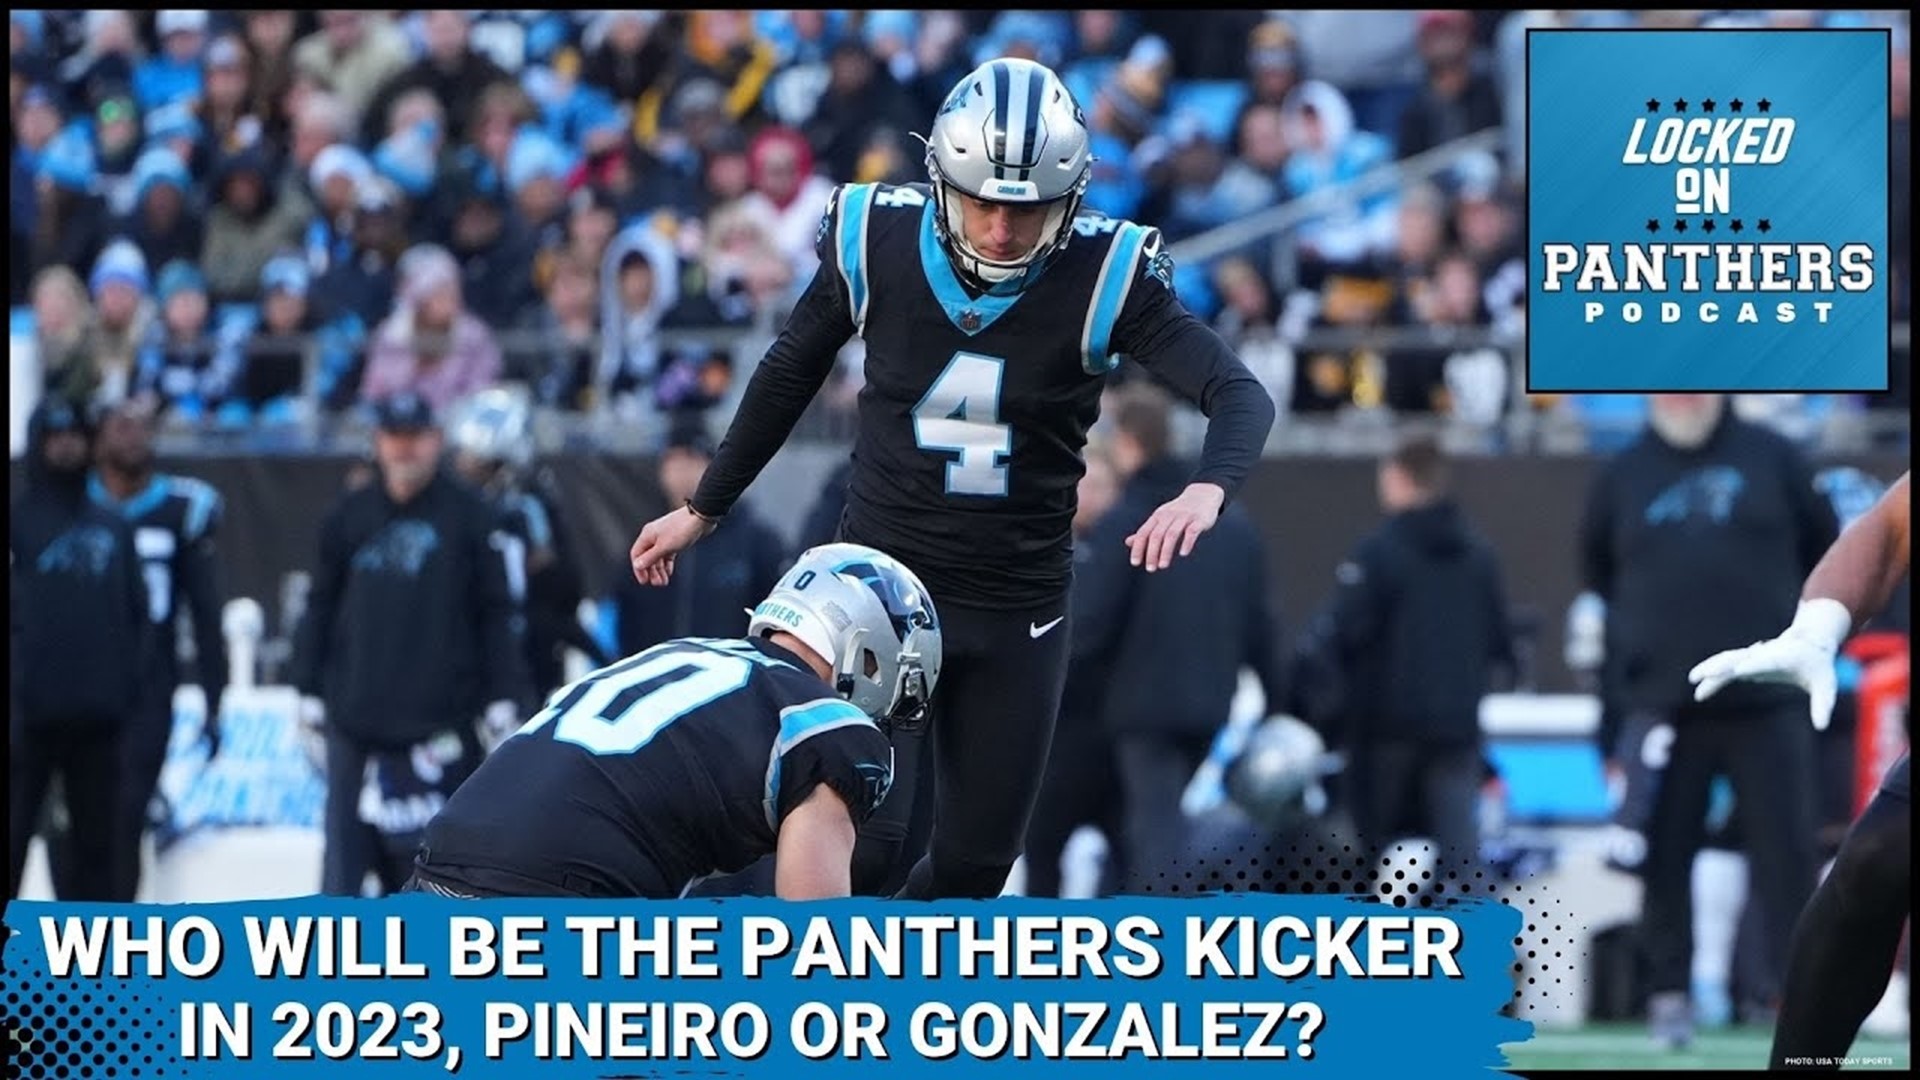 As the month of March winds down, the Carolina Panthers will start to shift their attention to evaluating prospects ahead of the NFL Draft.